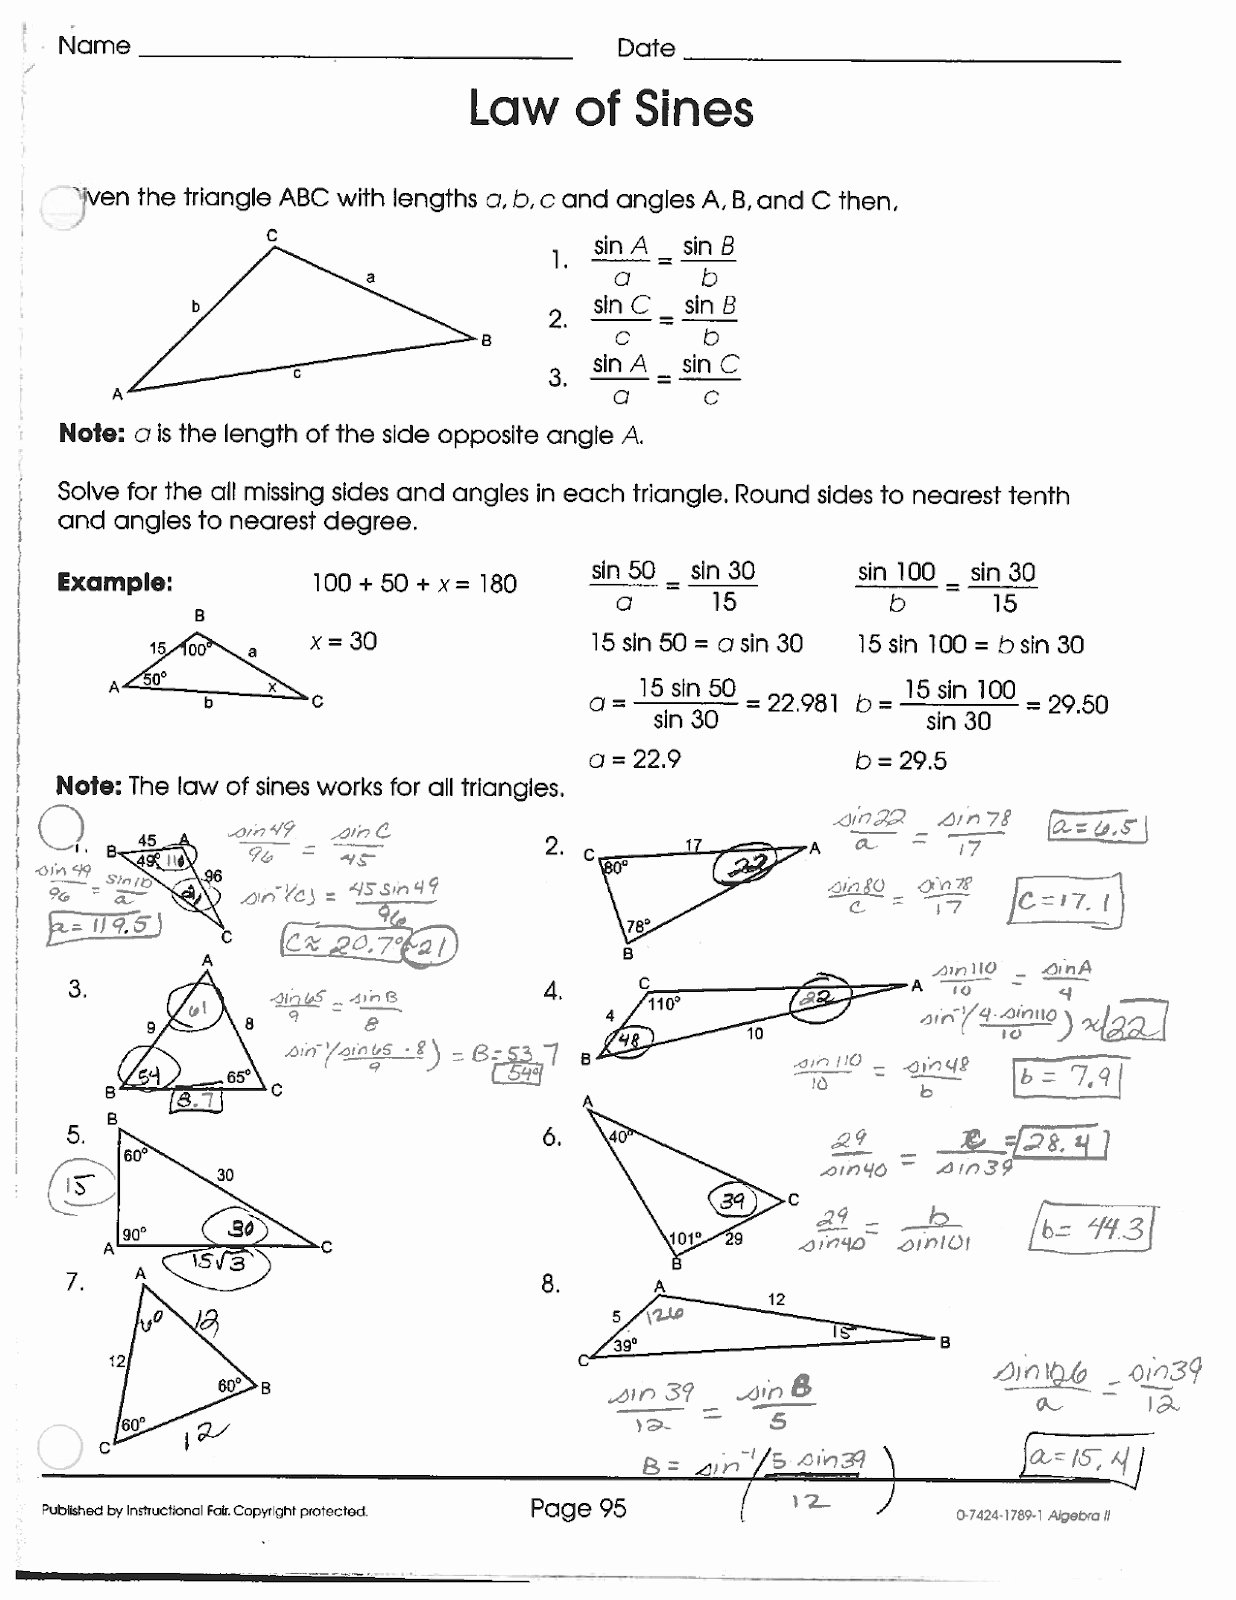 Law Of Sines Worksheet Answers Fresh Math Classes Spring 2012 May 2012